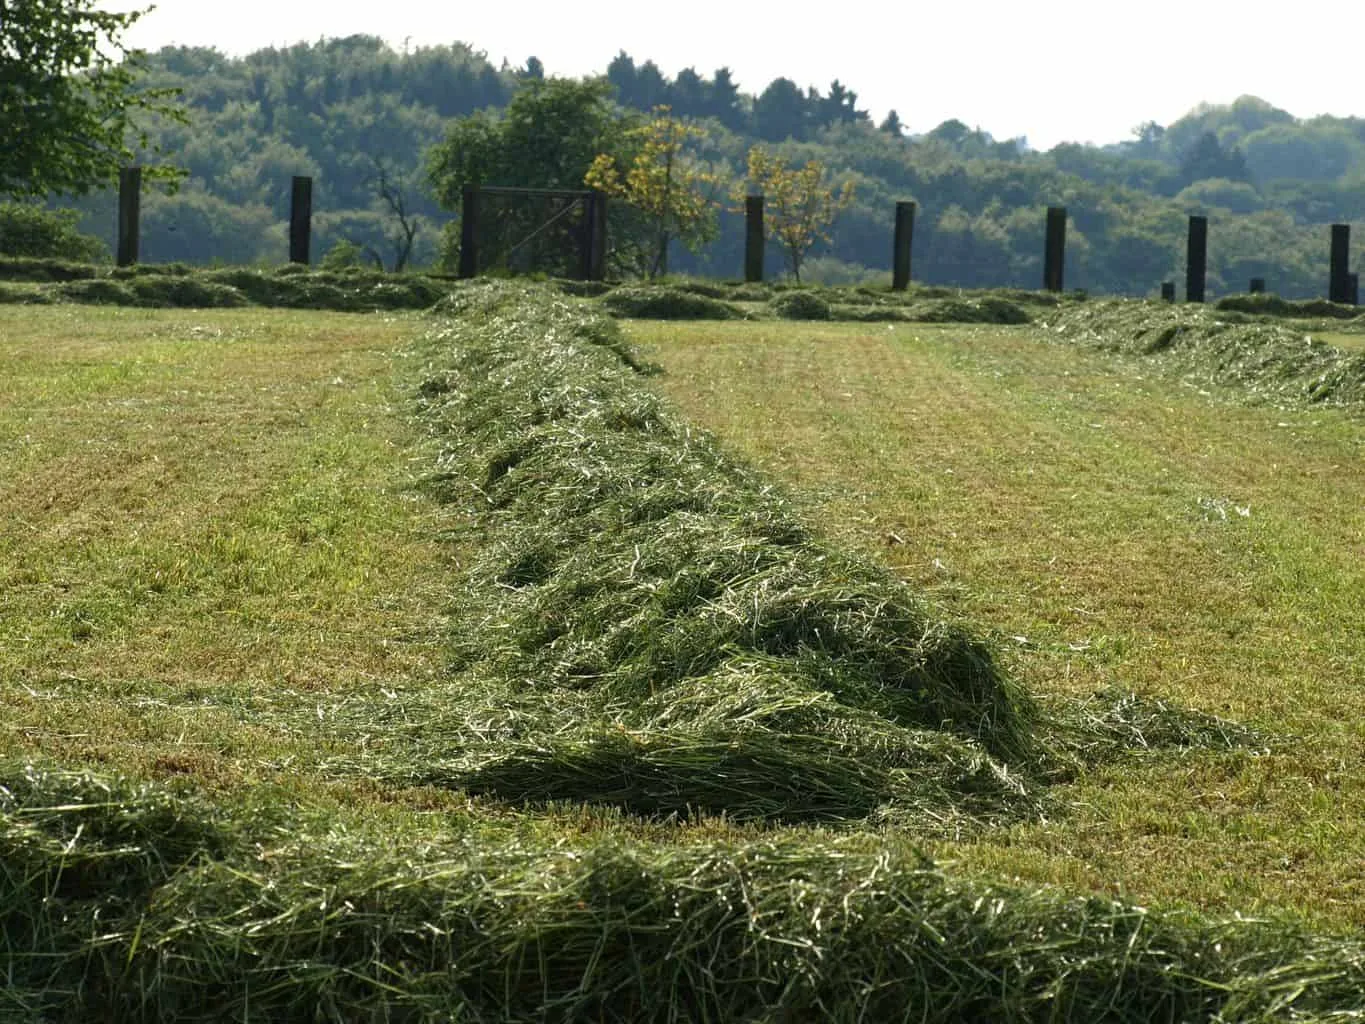 Hay in a windrow not baled yet